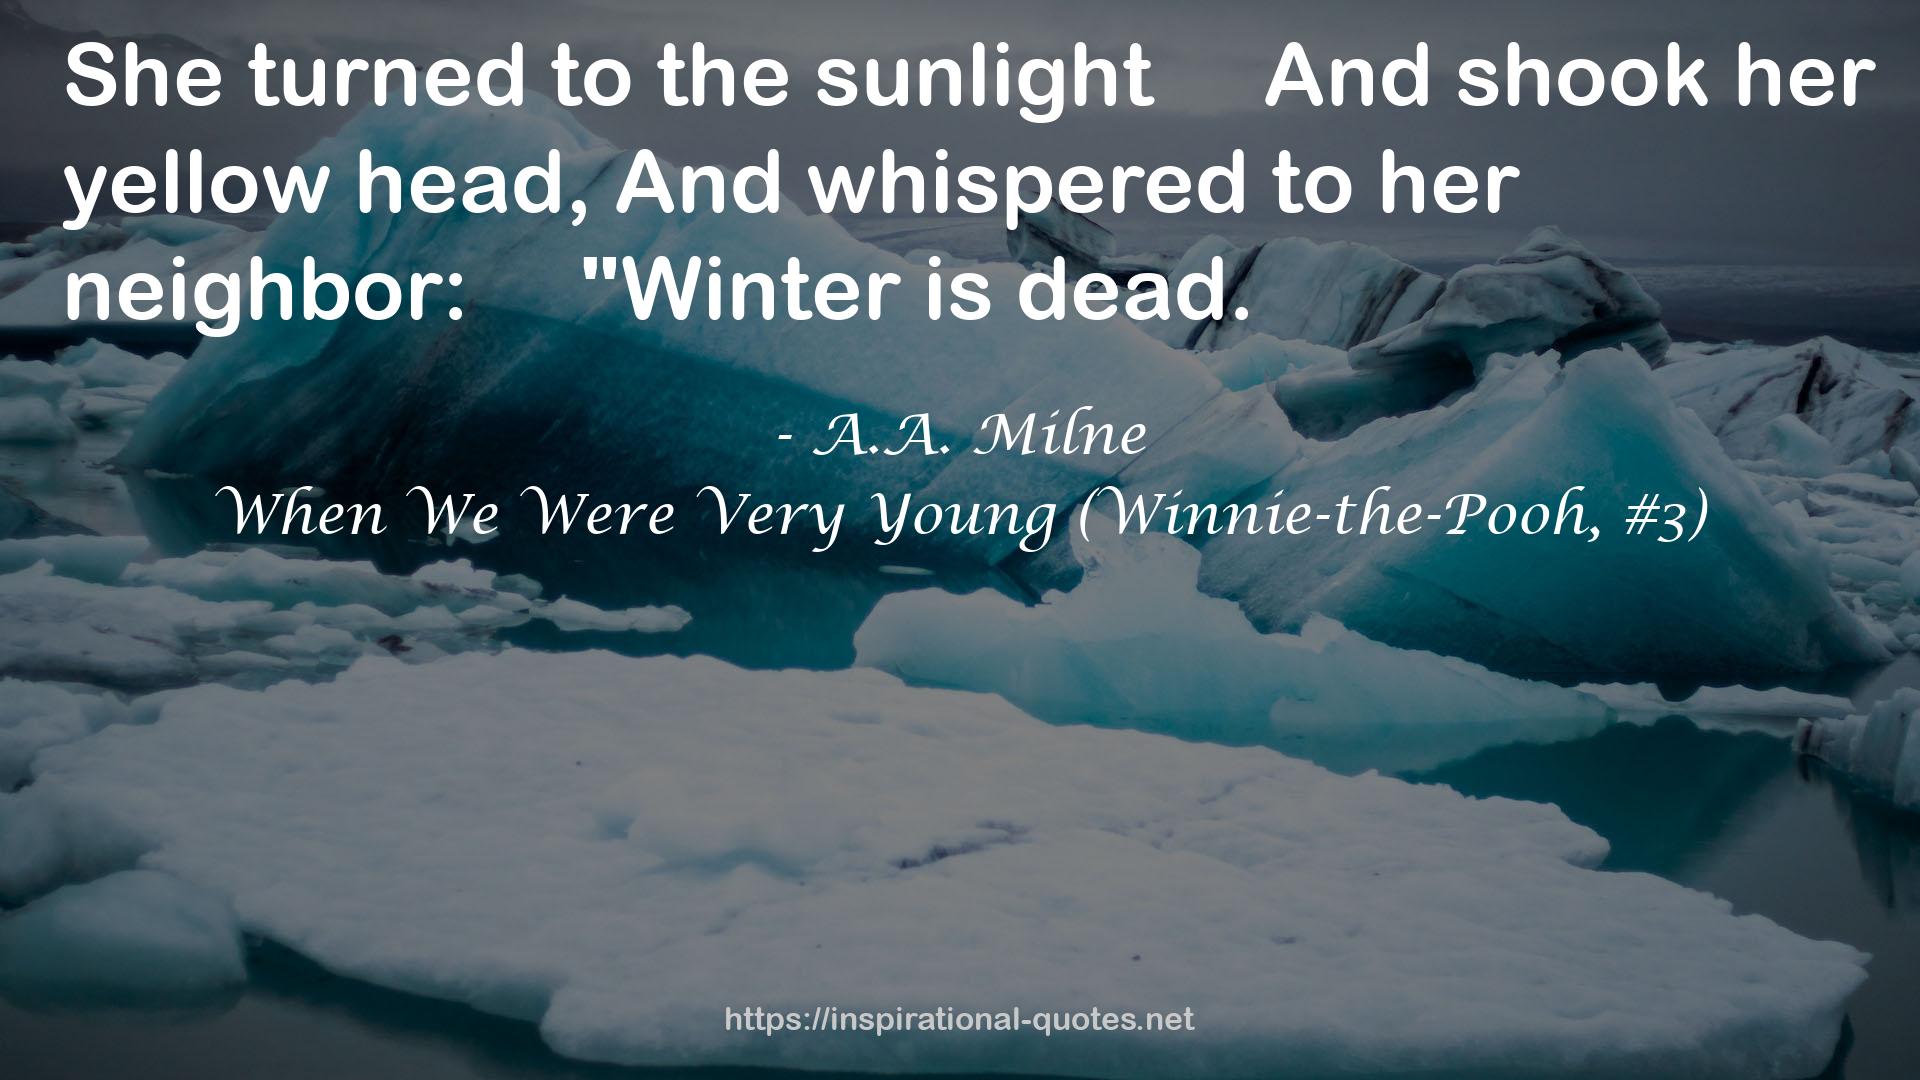 When We Were Very Young (Winnie-the-Pooh, #3) QUOTES